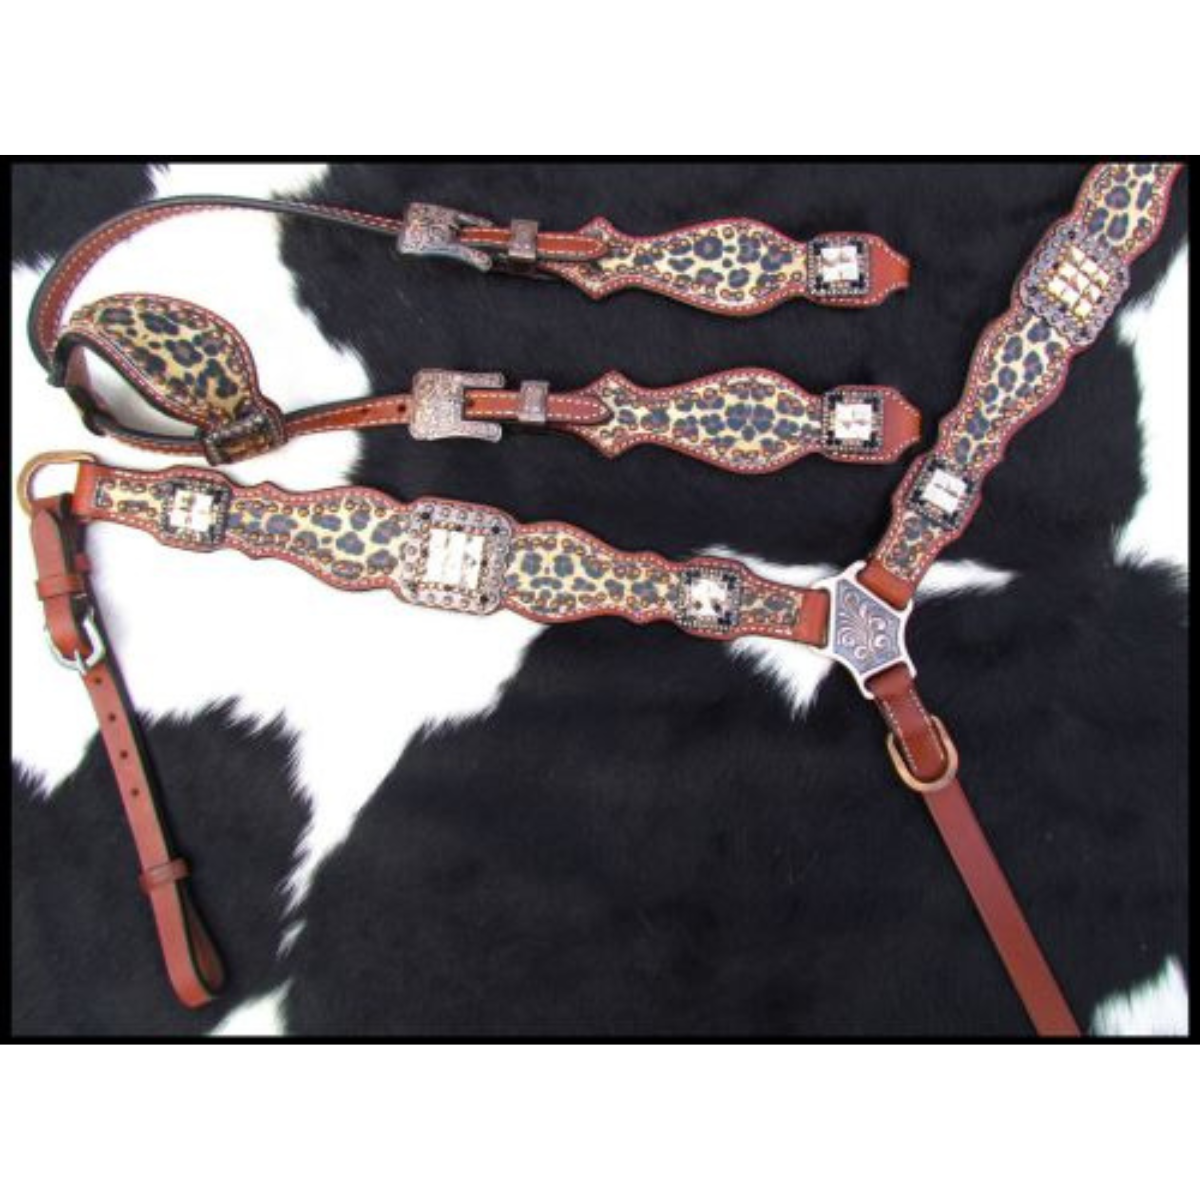 Showman ® Cheetah print one ear headstall and breast collar set. - Double T Saddles